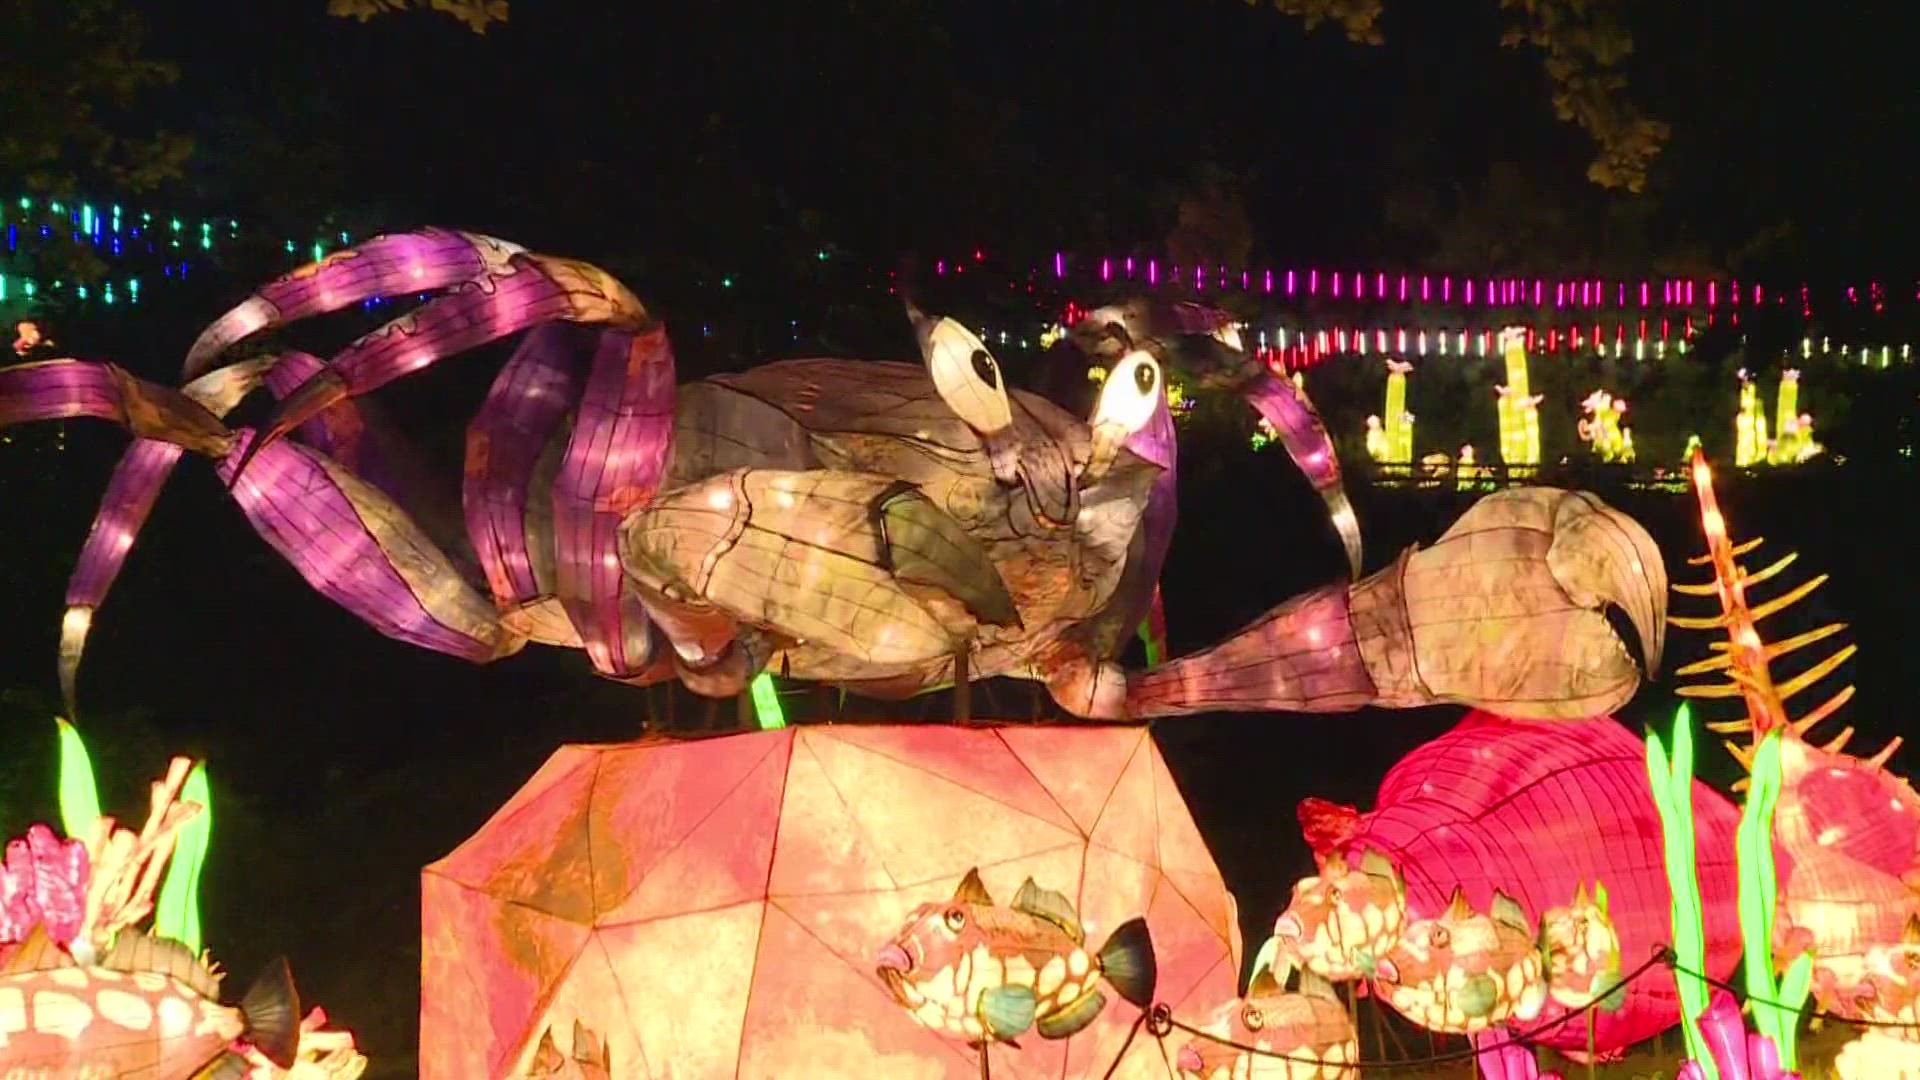 3News' Austin Love gives us a special look inside the Asian Lantern Festival at the Cleveland Metroparks Zoo.